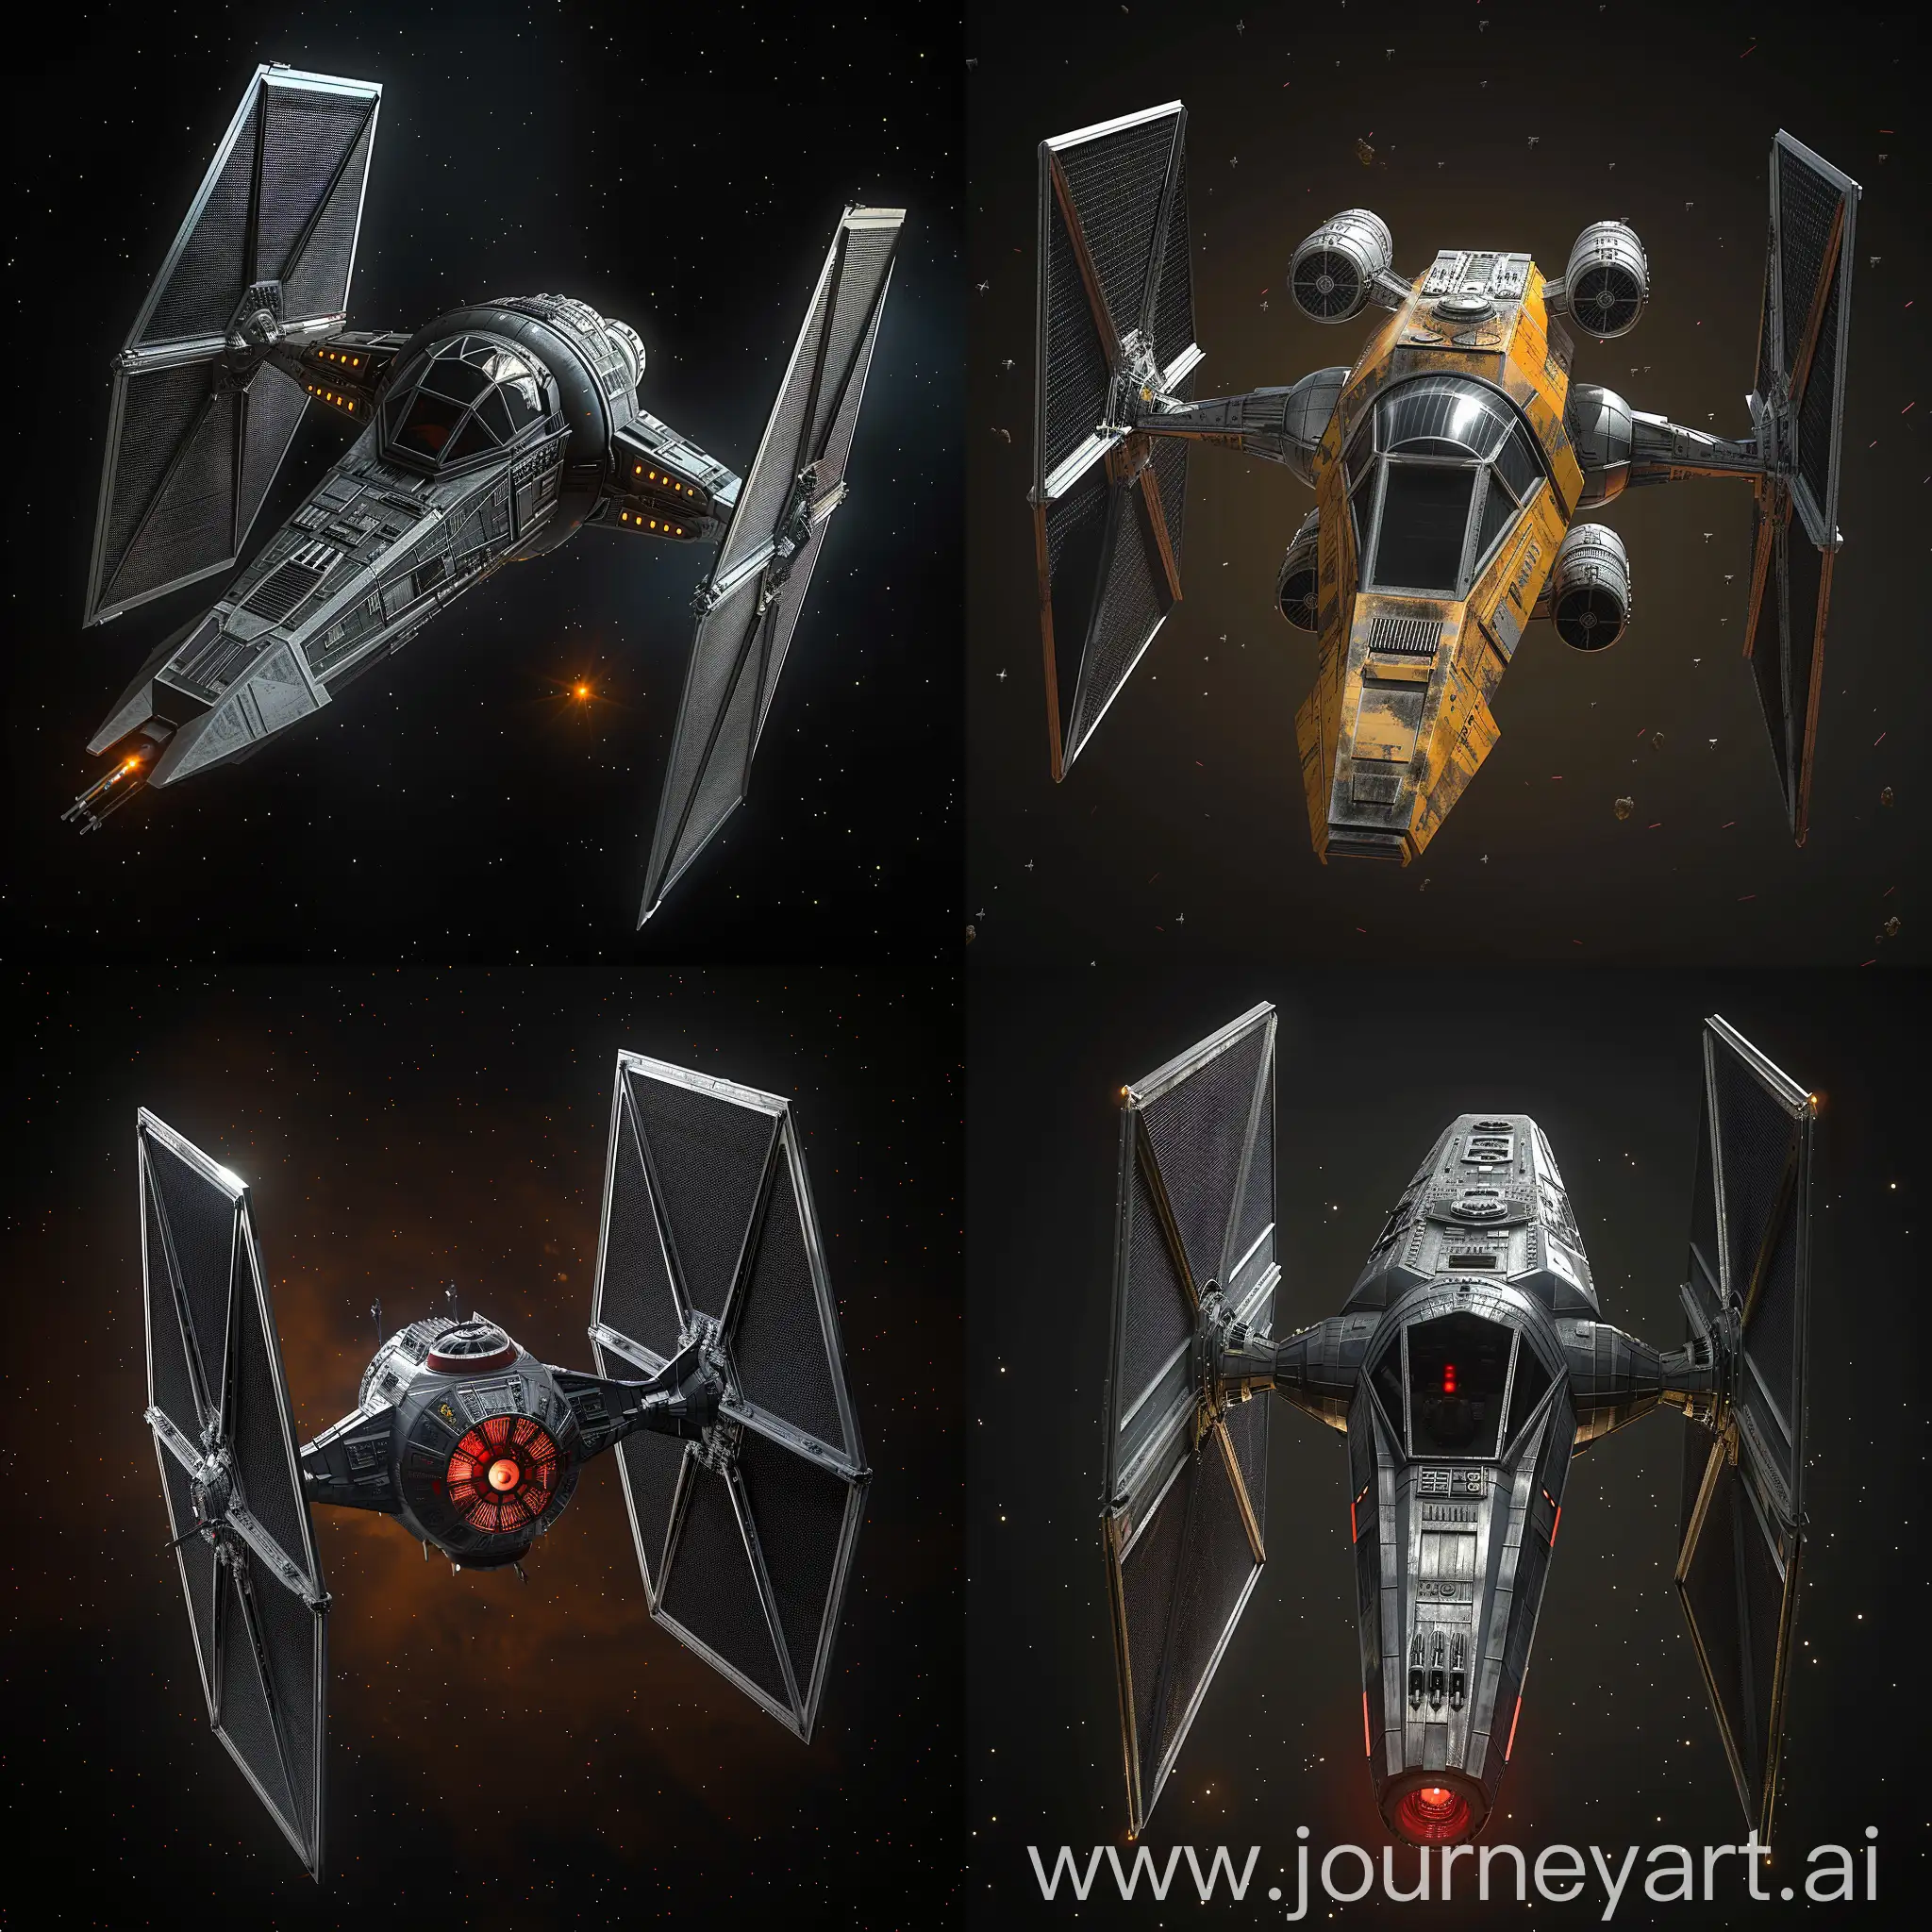 Futuristic-Star-Wars-TIE-Fighter-with-Advanced-Technology-and-Bioinspired-Features